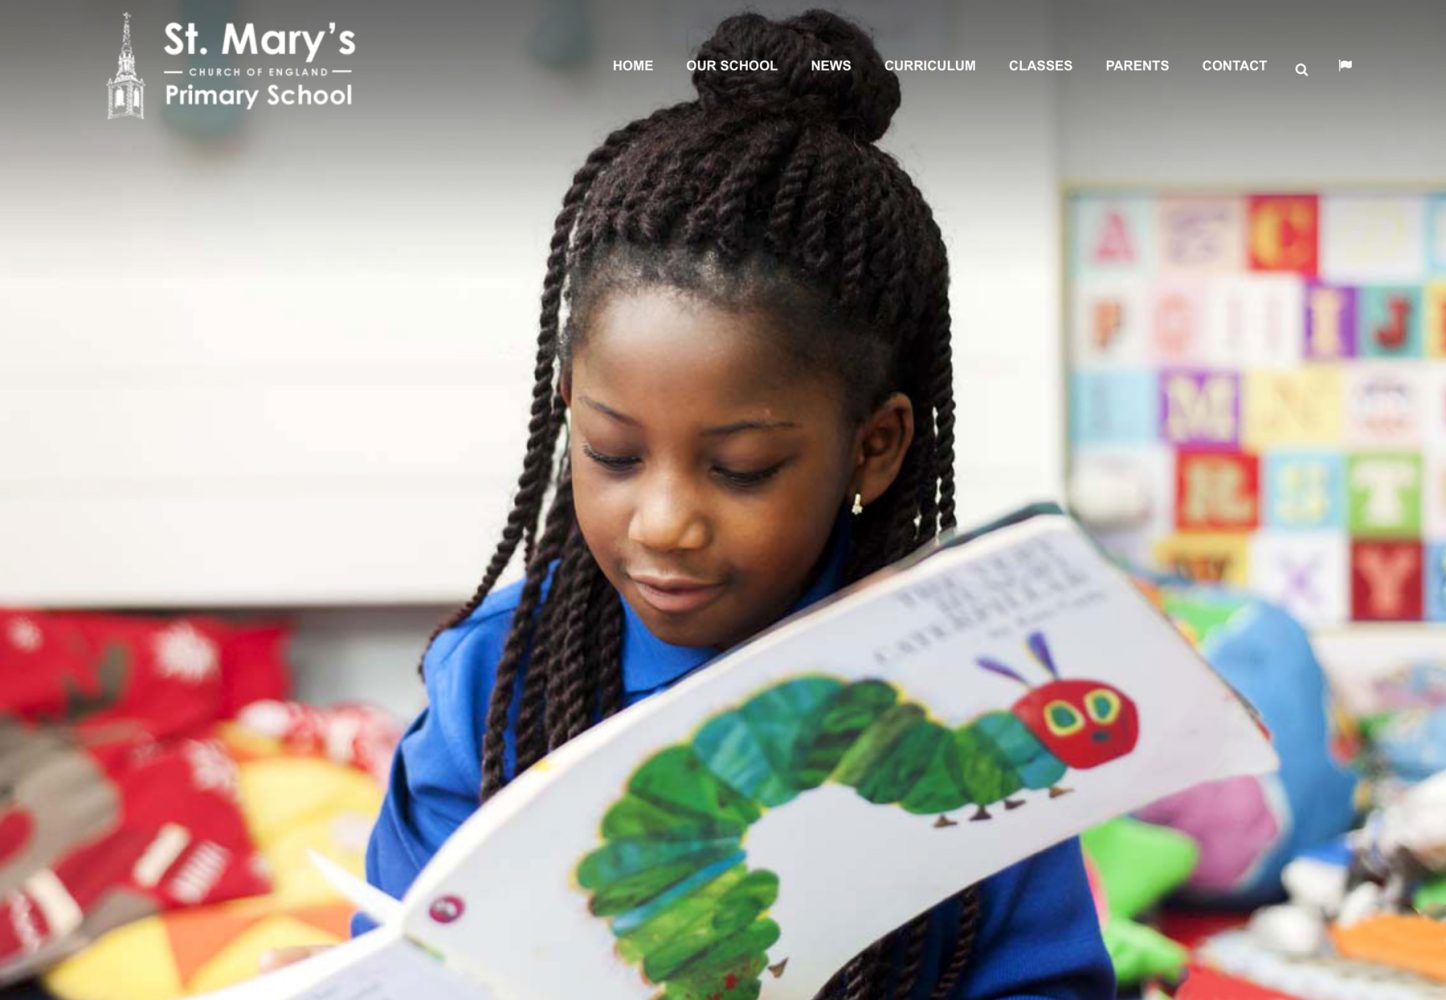 School website photography by James Robertshaw - St Marys homepage